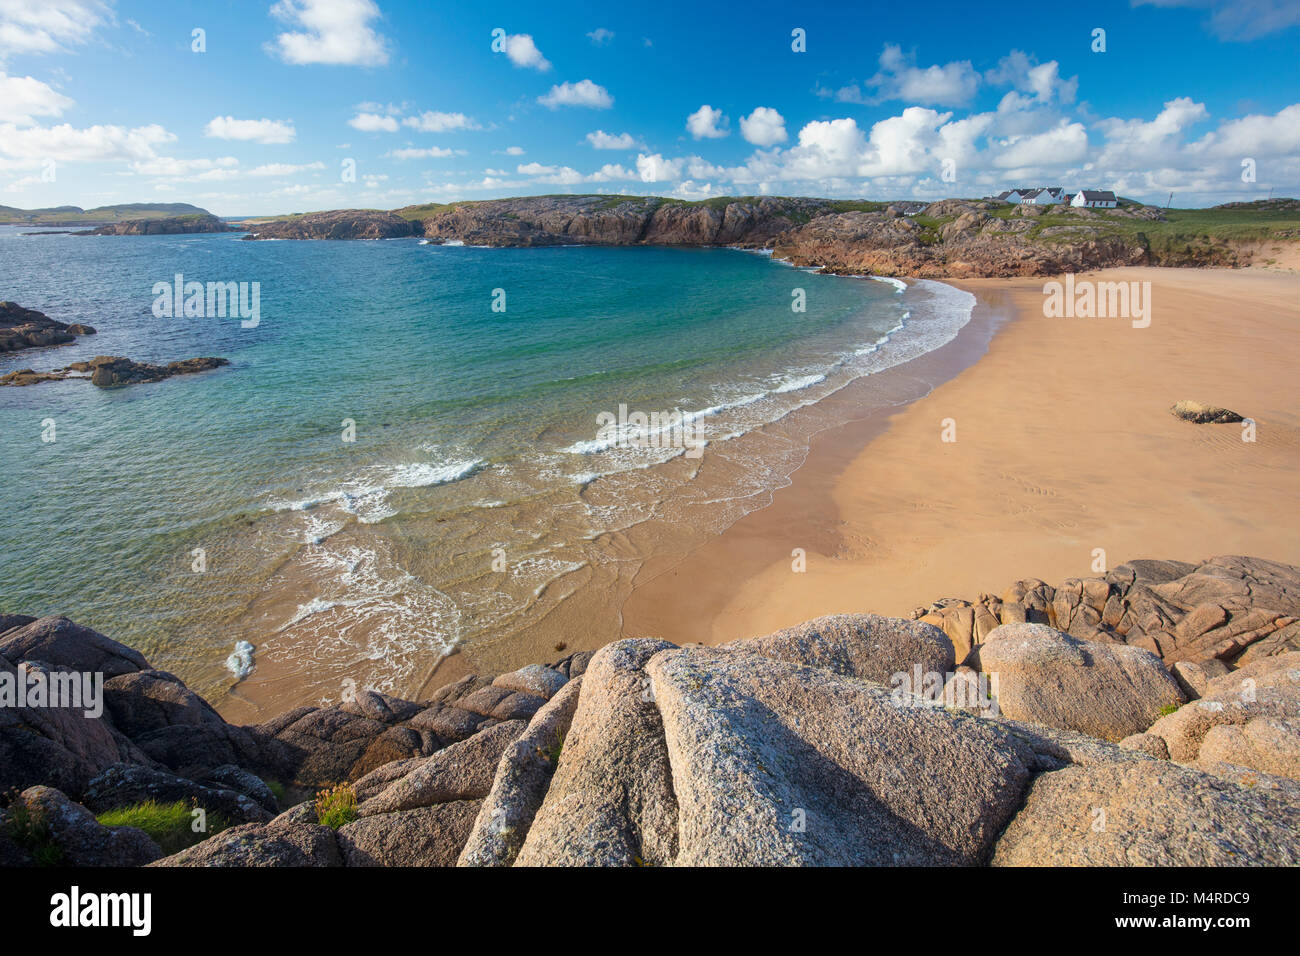 Sandy cove in Traderg Bay, Cruit Island, The Rosses, County Donegal, Ireland. Stock Photo